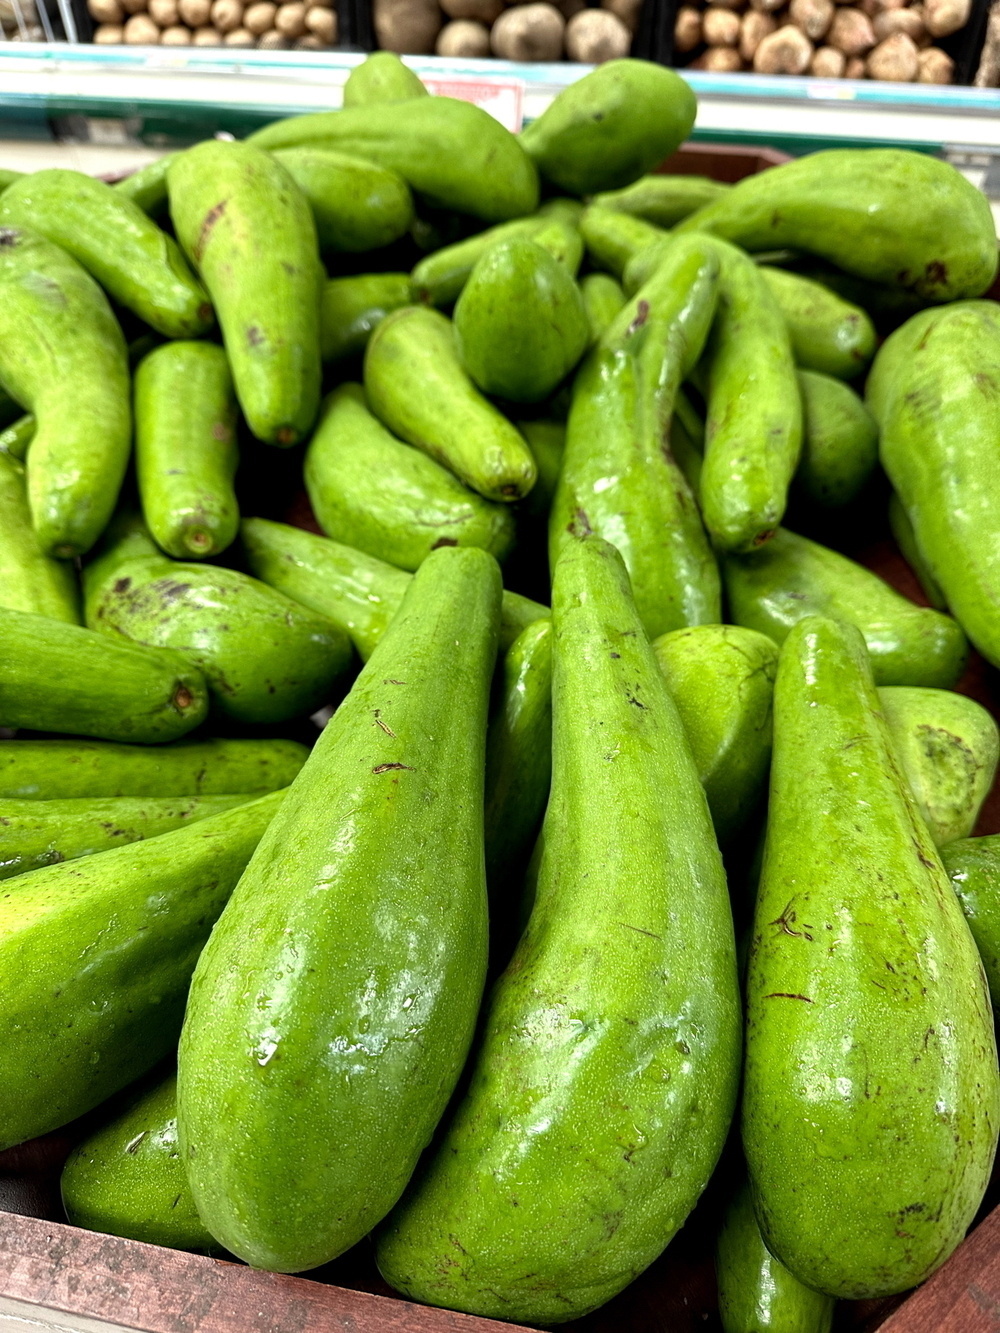 A close-up of several green, elongated avocados displayed in a produce section of a supermarket.